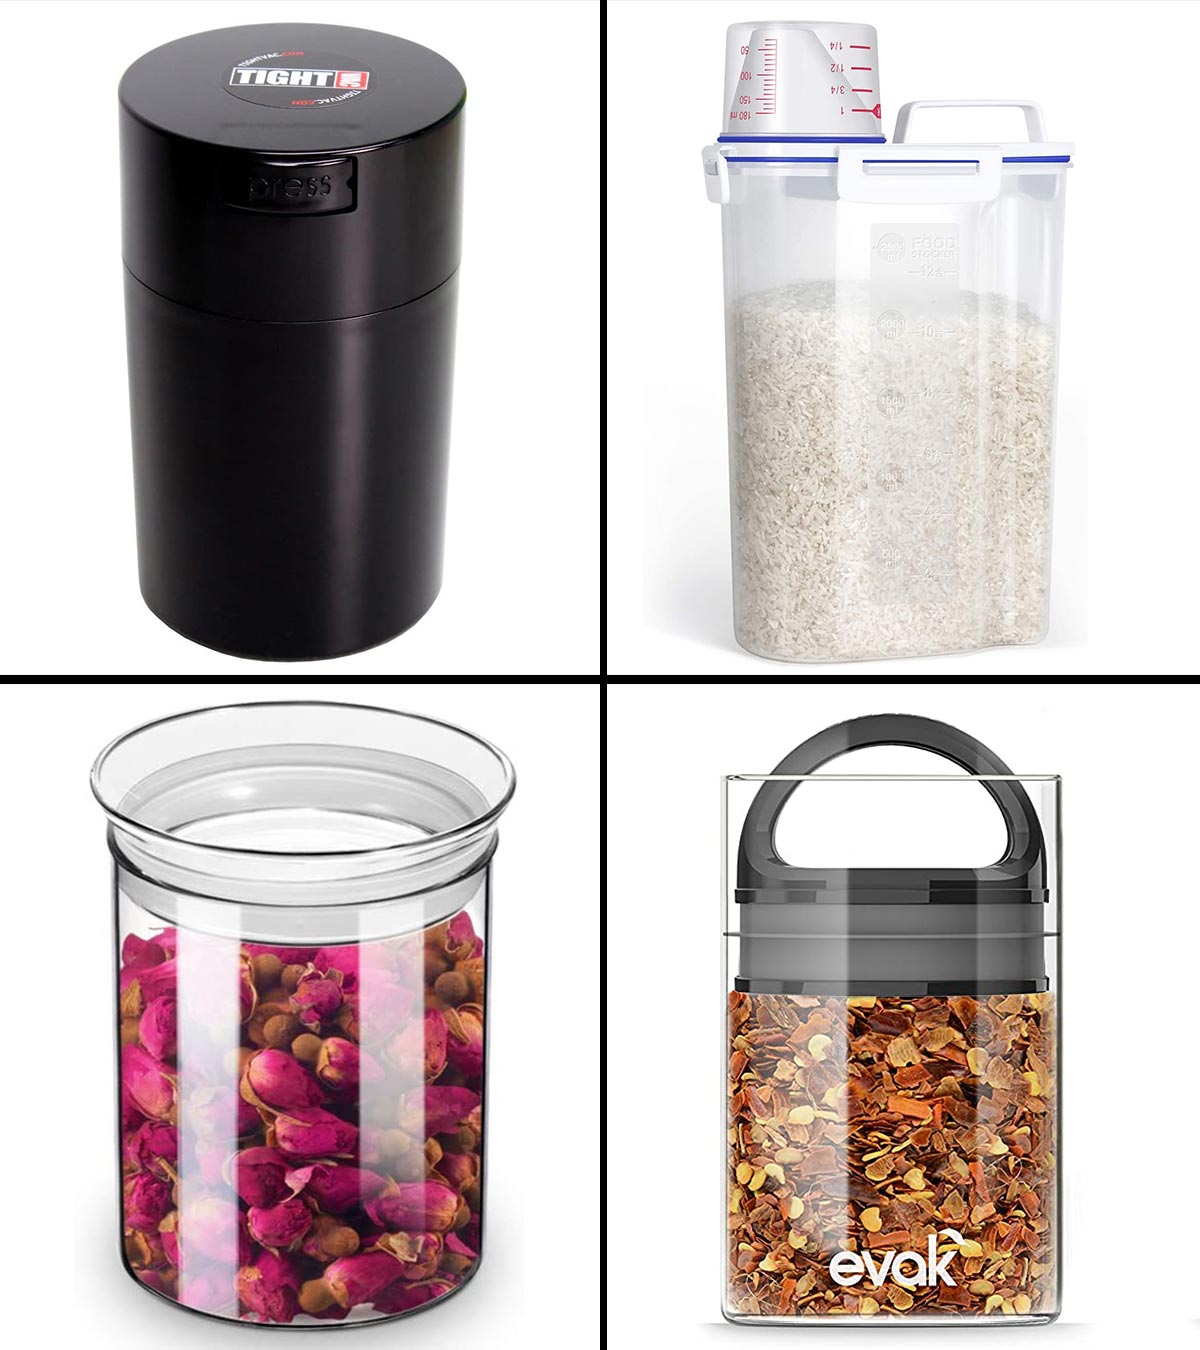 https://www.momjunction.com/wp-content/uploads/2020/10/15-Best-Airtight-Containers-To-Buy-Banner-MJ.jpg